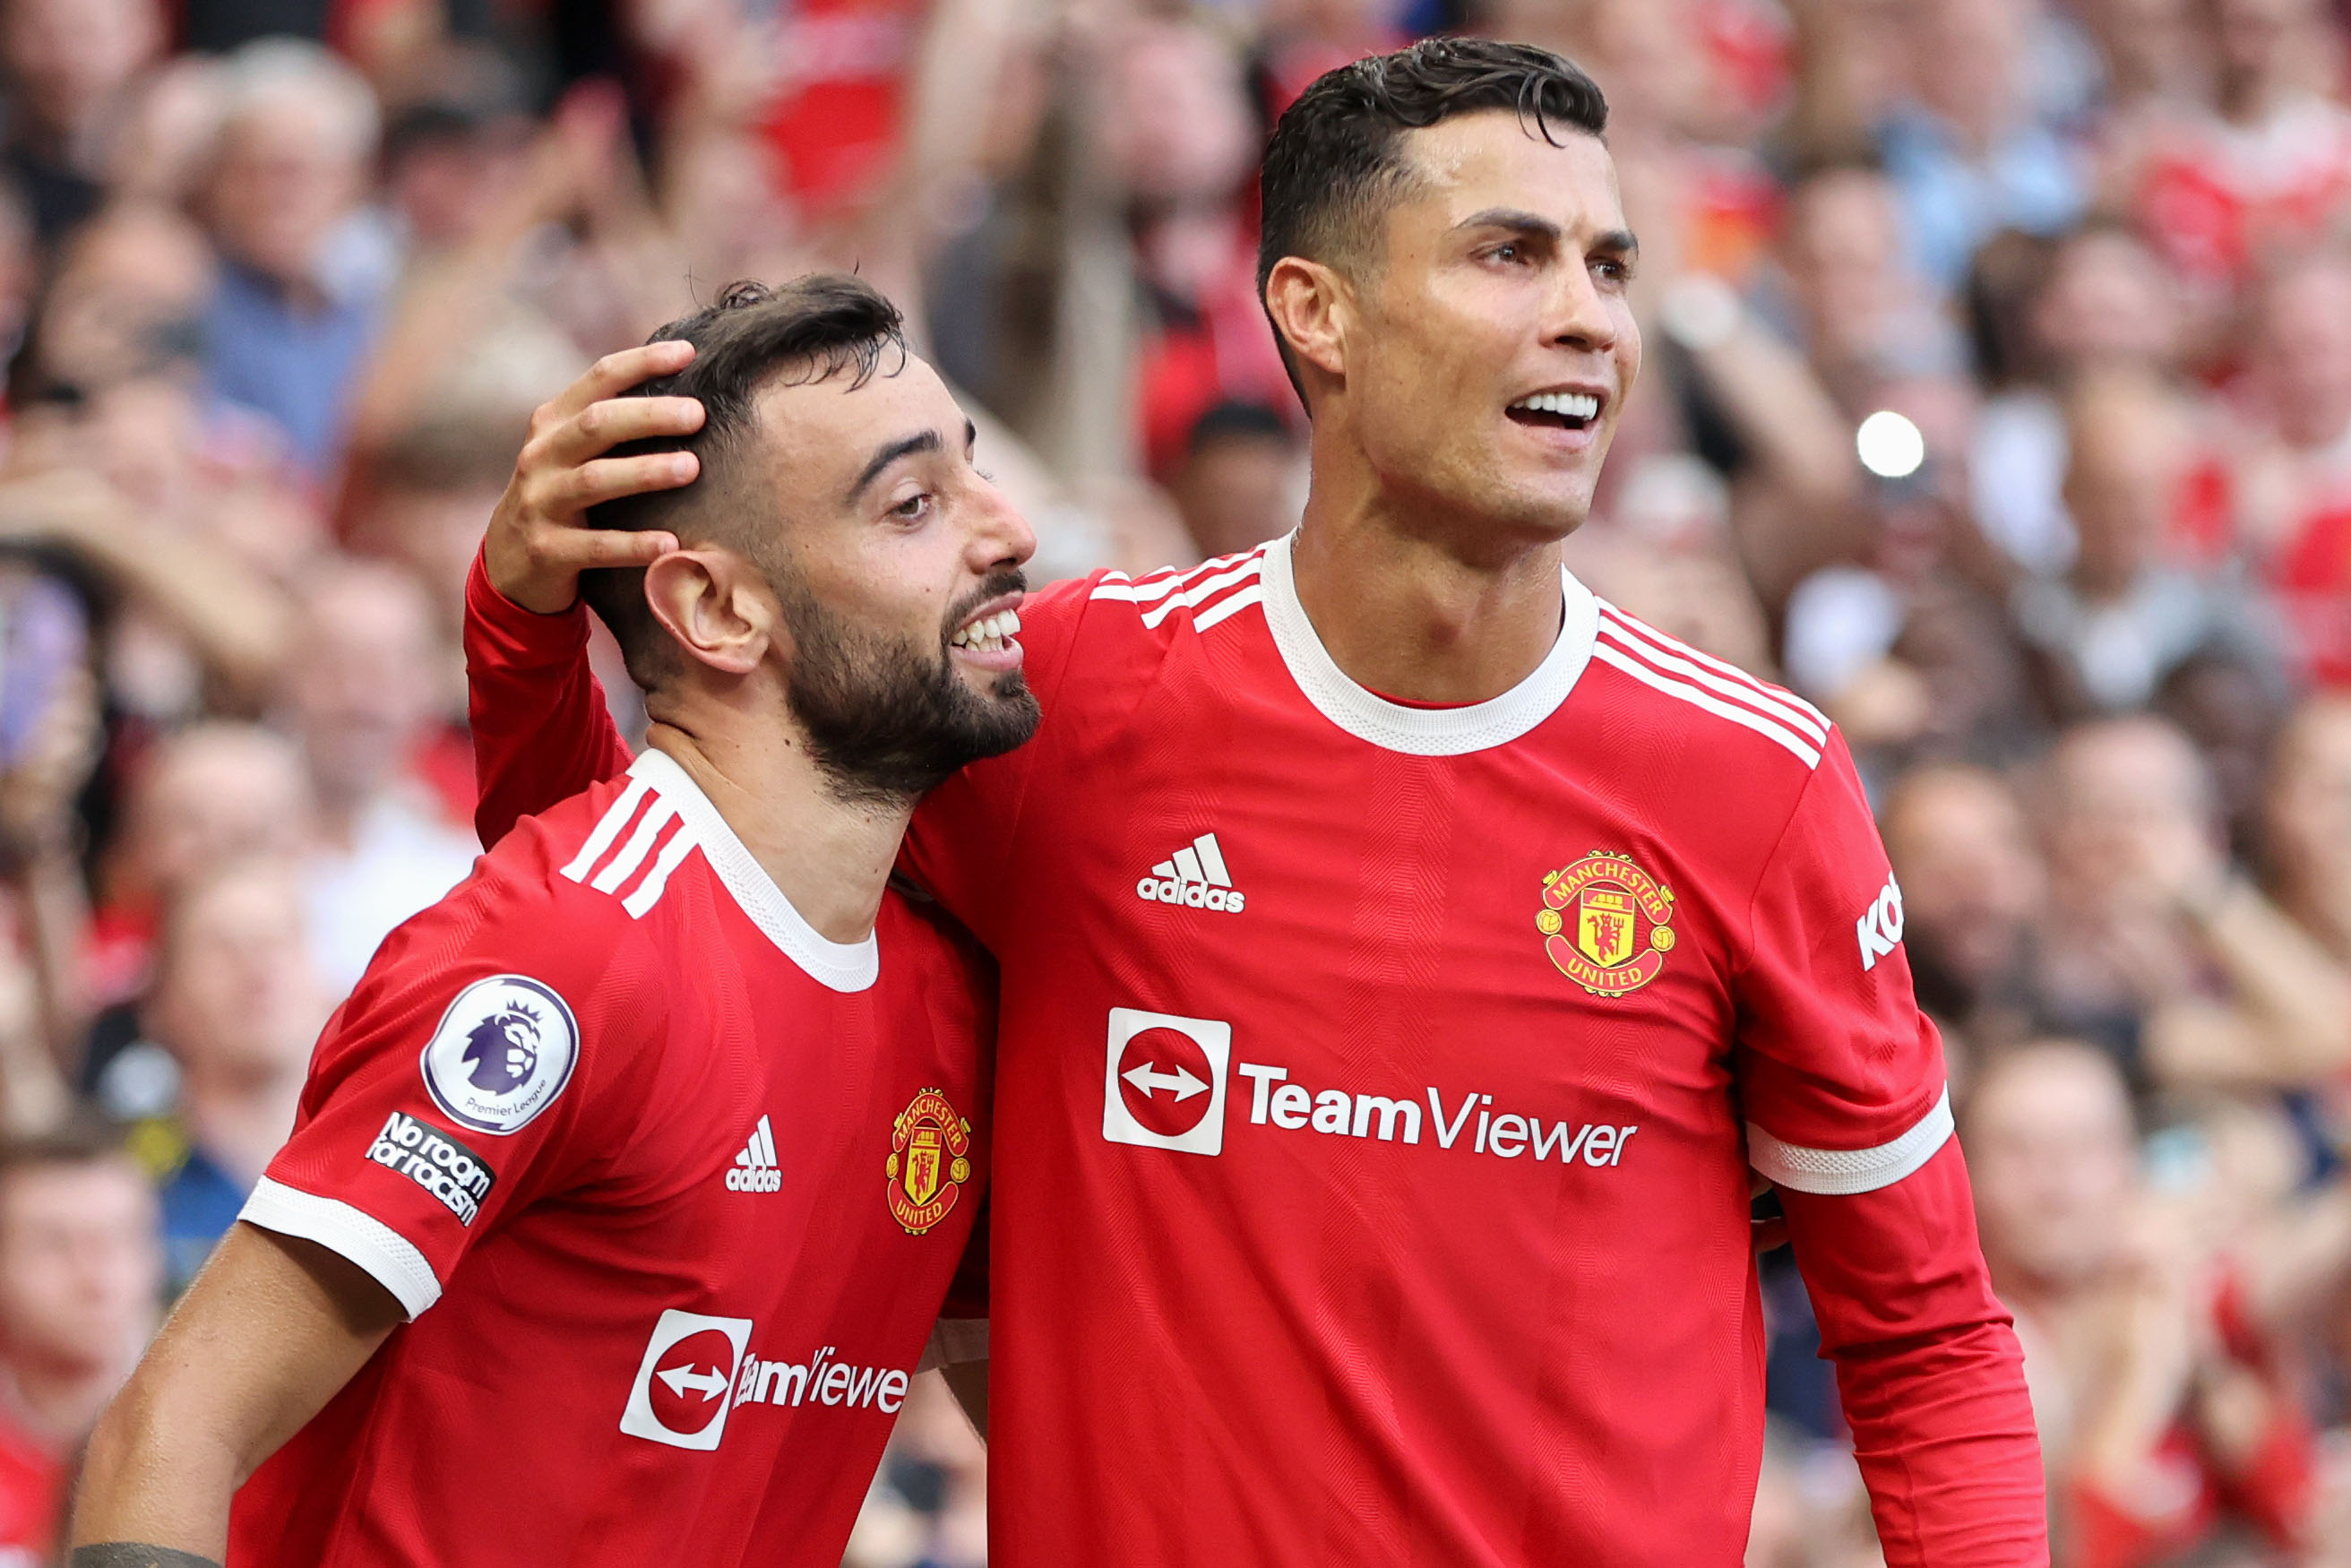 Fantasy Premier League 2022/23: Big price drops for Cristiano Ronaldo and Bruno Fernandes, FPL reveals prices for Manchester United assets - Check out